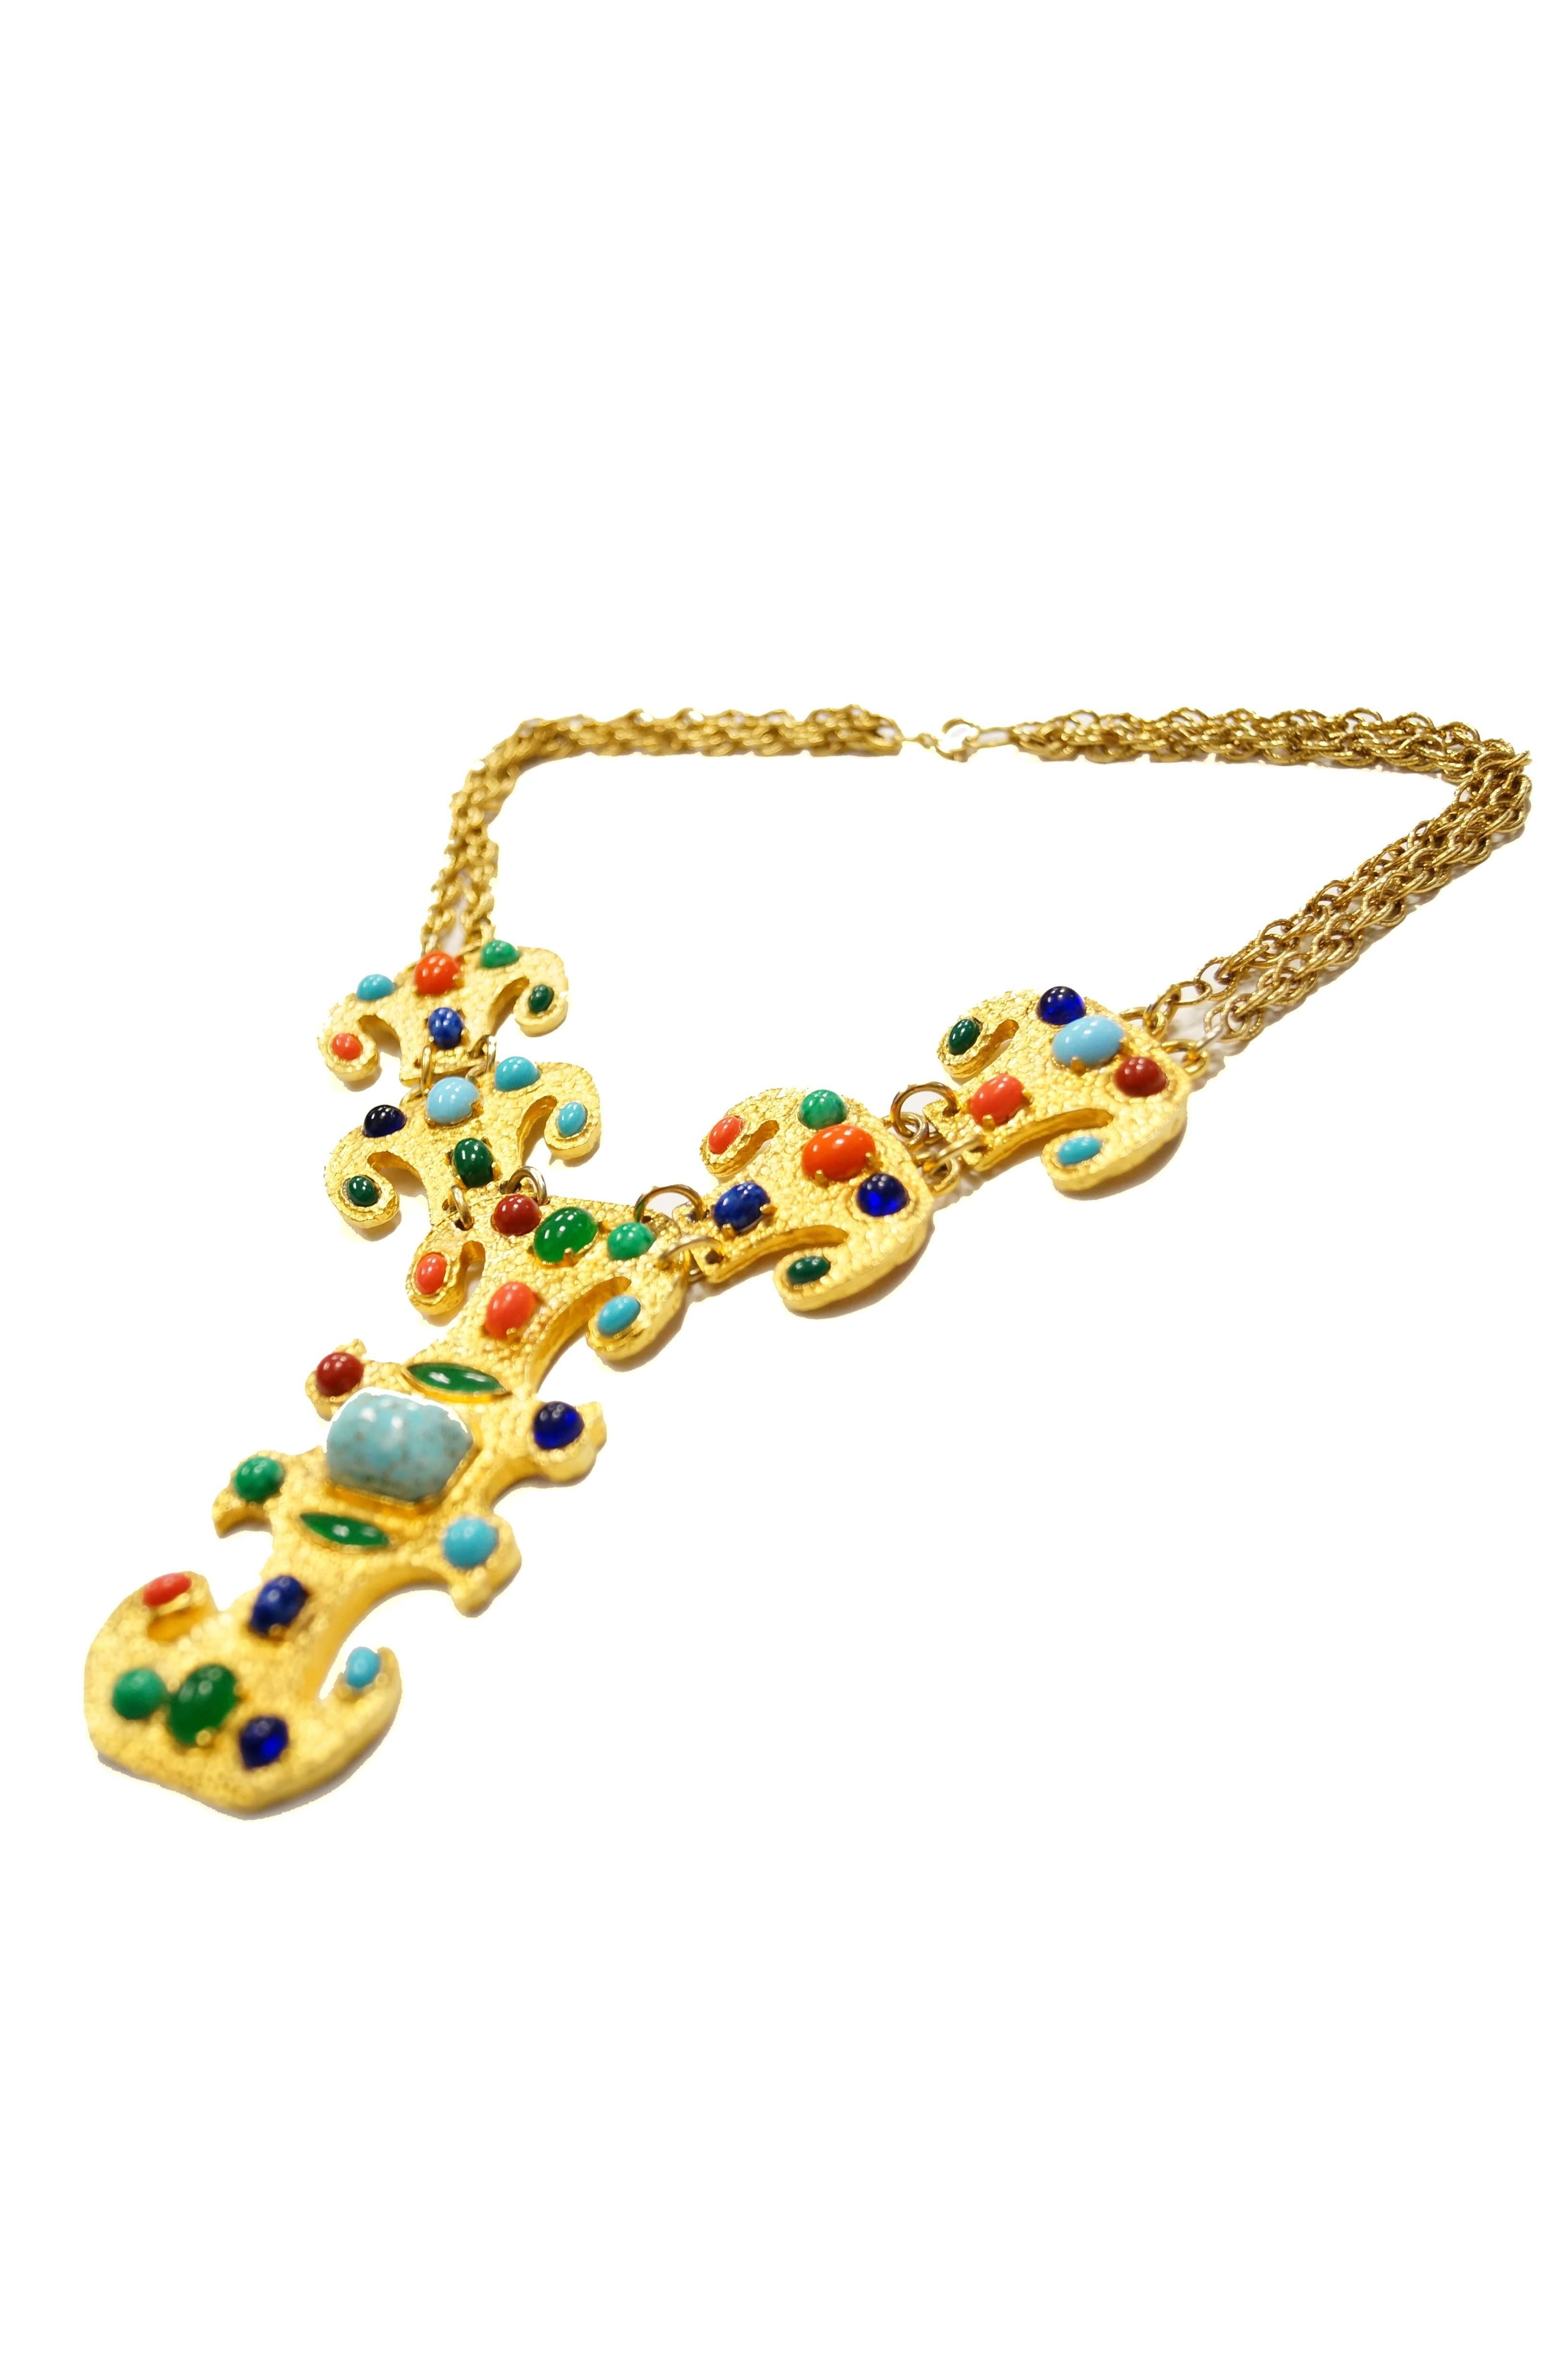 Fantastic gold - tone statement necklace by Donald Stannard! The necklace is composed of several heavy linked plates ornamented with bright and cheery cabochons! The central plate is key - like, with several notches and divots. 

The piece, with its